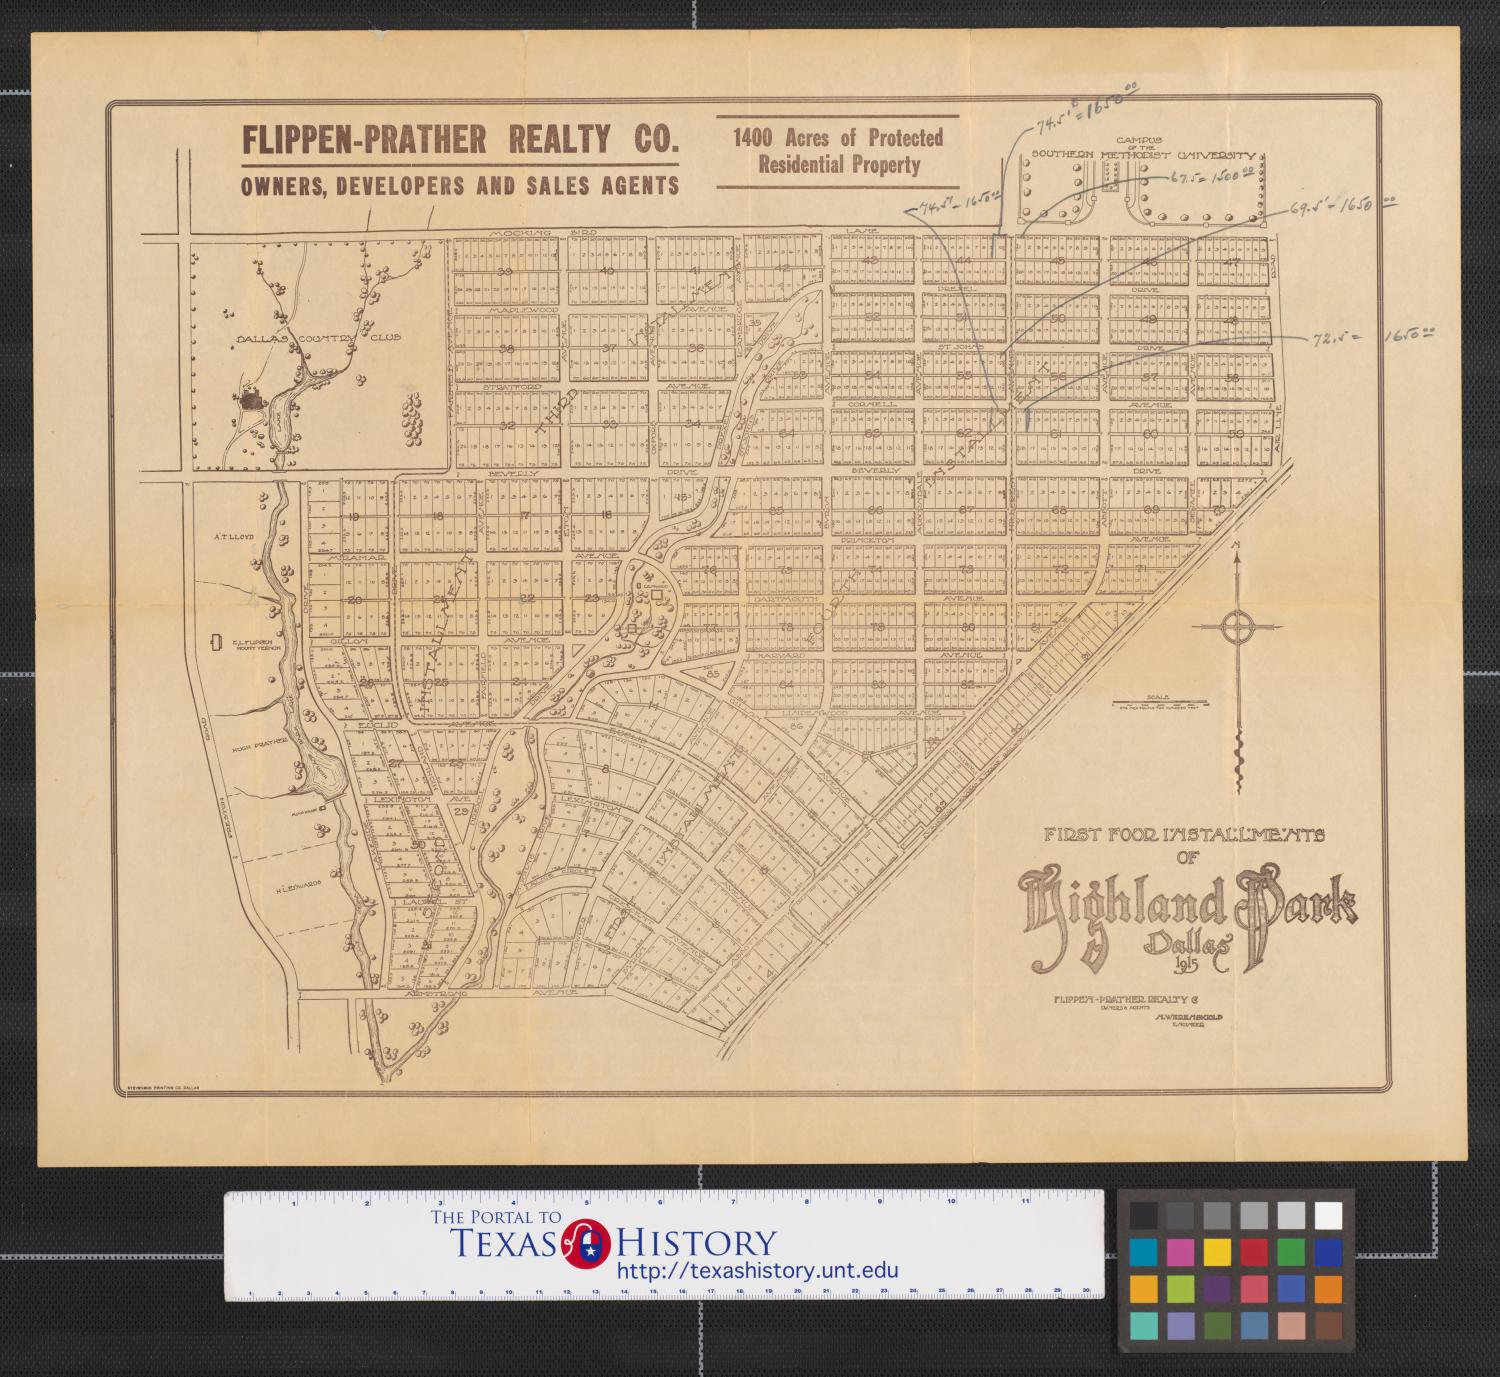 First four installments of Highland Park Dallas., Map shows location of Southern Methodist University campus; the Missouri, Kansas and Texas railway; routes of the street car lines; and the Dallas Country Club. Upper center of map shows fourteen hundred acres of protected residential property. No scale noted., 